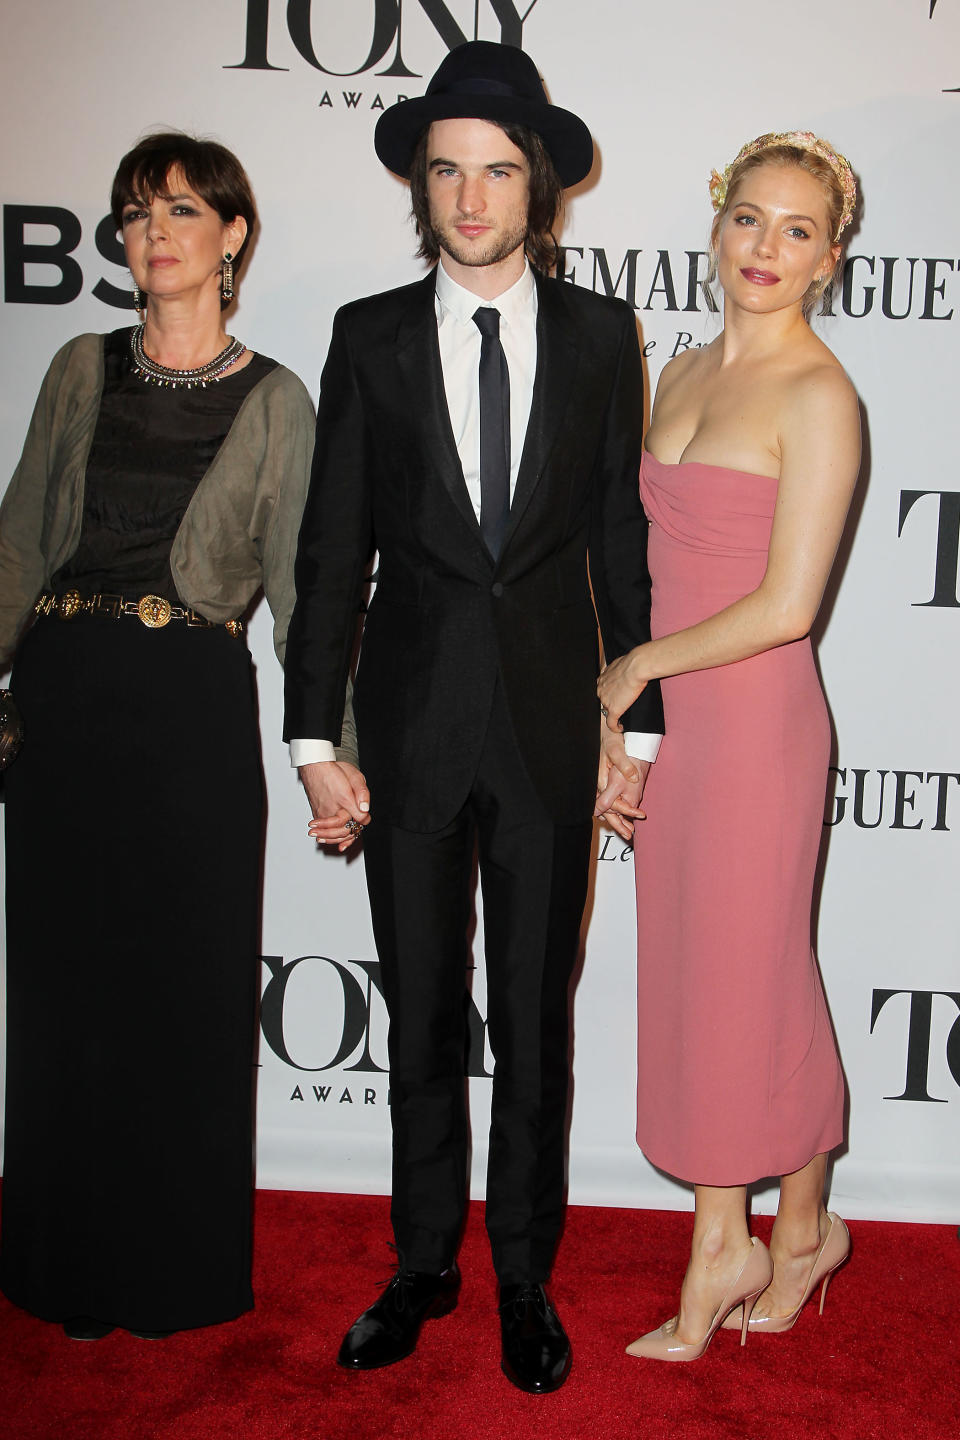 This image released by Starpix shows Tom Sturridge, center, his mother Phoebe Nicholls, left, and Sienna Miller at the 67th Annual Tony Awards in New York on Sunday, June 9, 2013. (AP Photo/Starpix, Amanda Schwab)